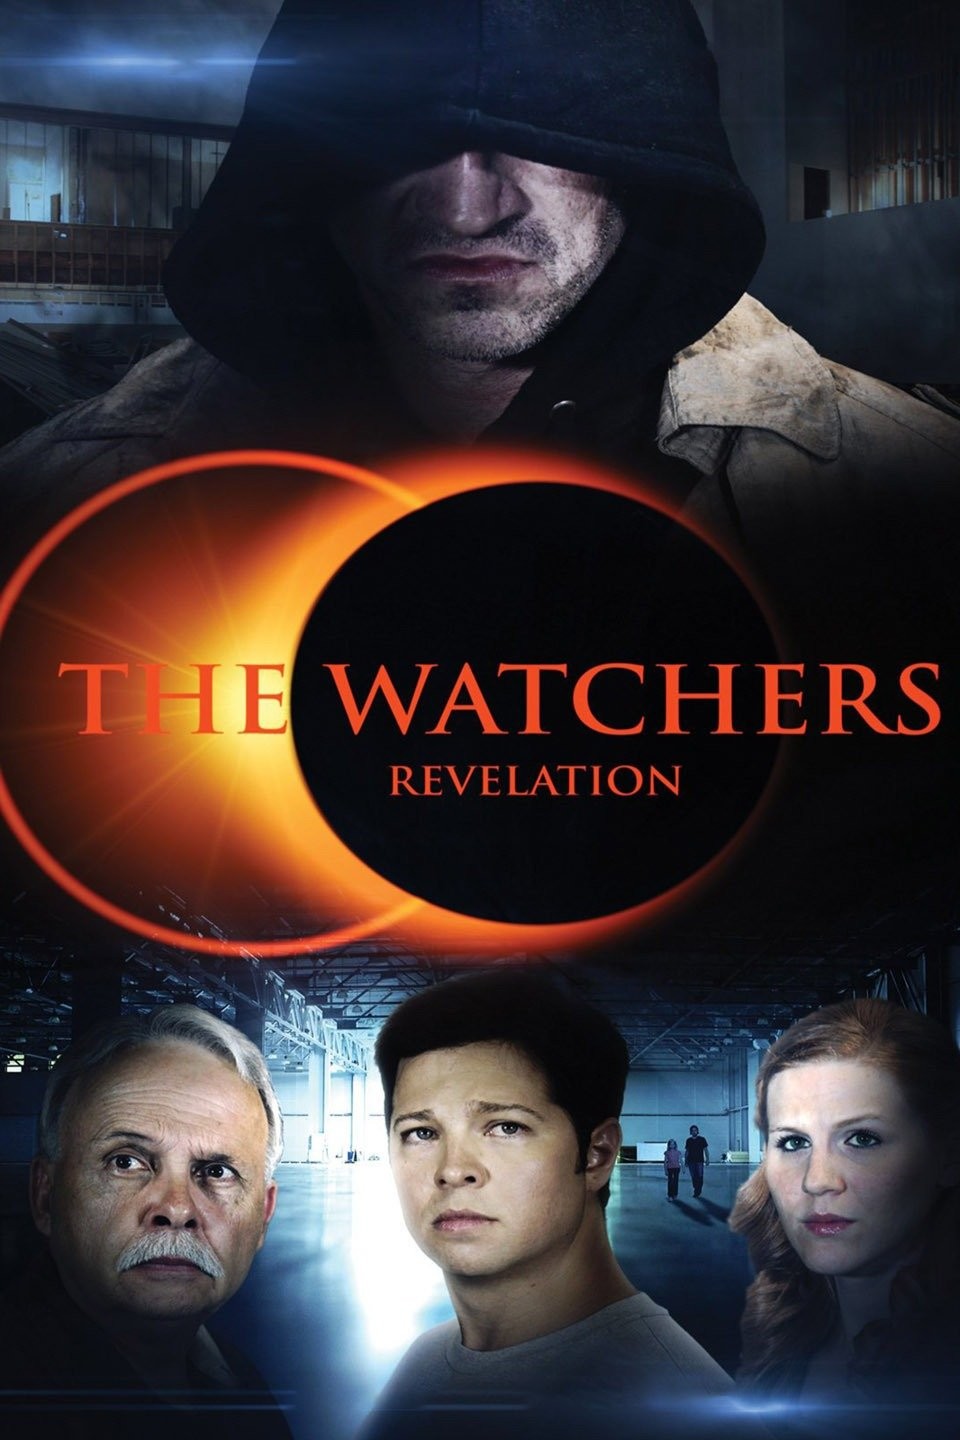 The Watchers - Rotten Tomatoes